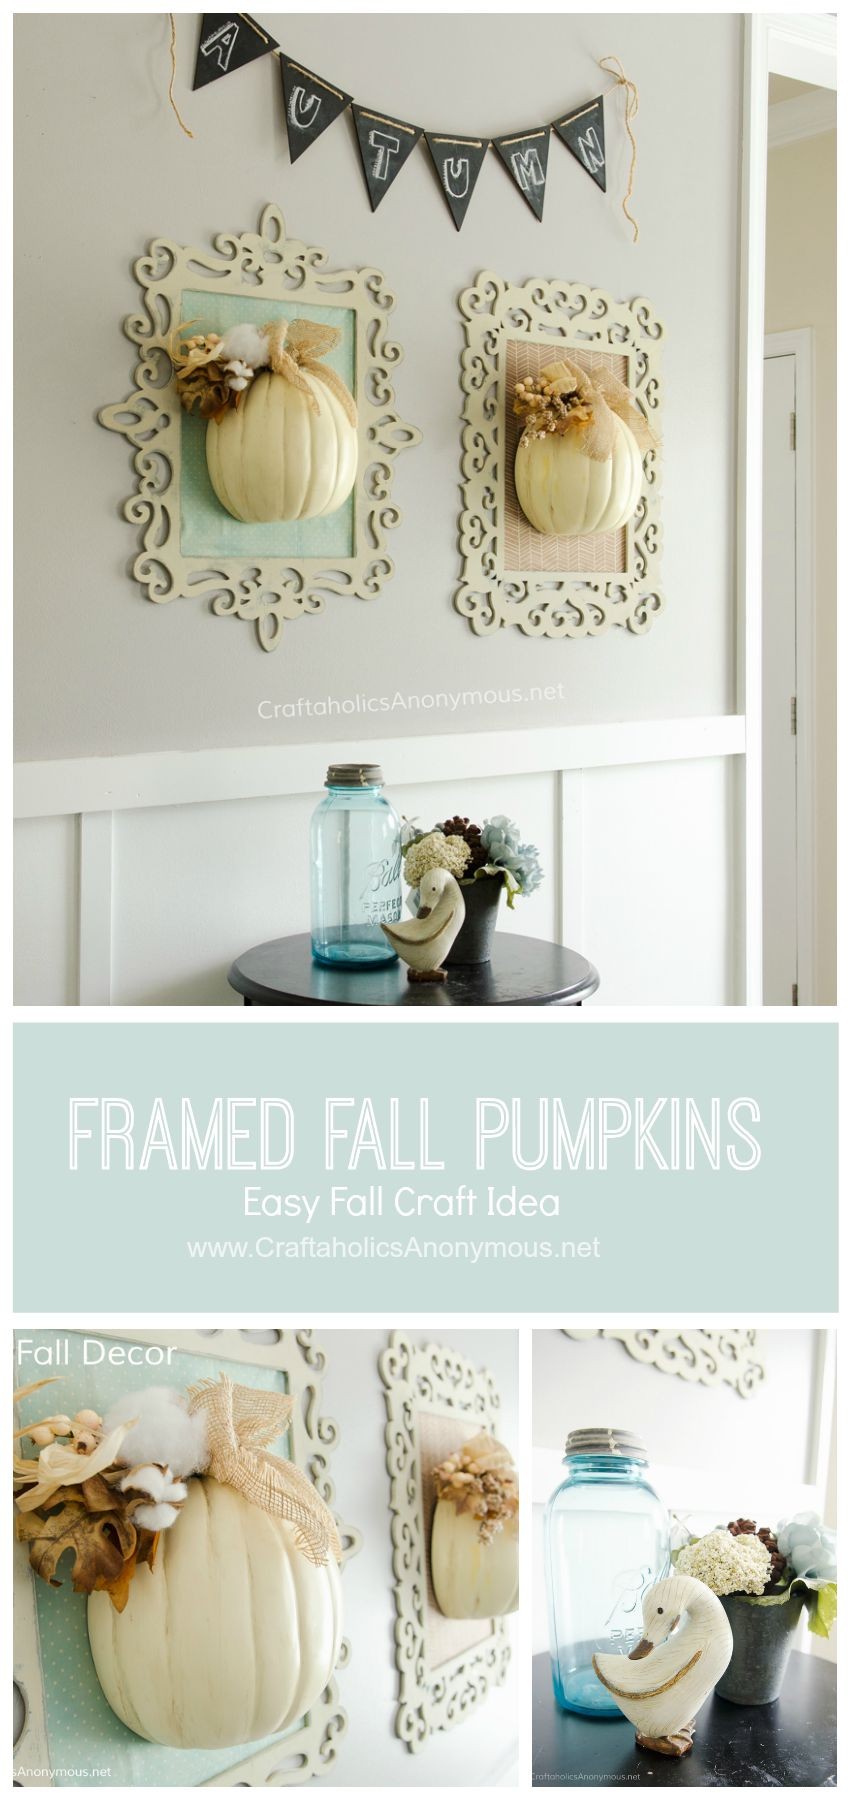 Framed Fall Pumpkins collage || This is a great way to use those fun curvy frames!